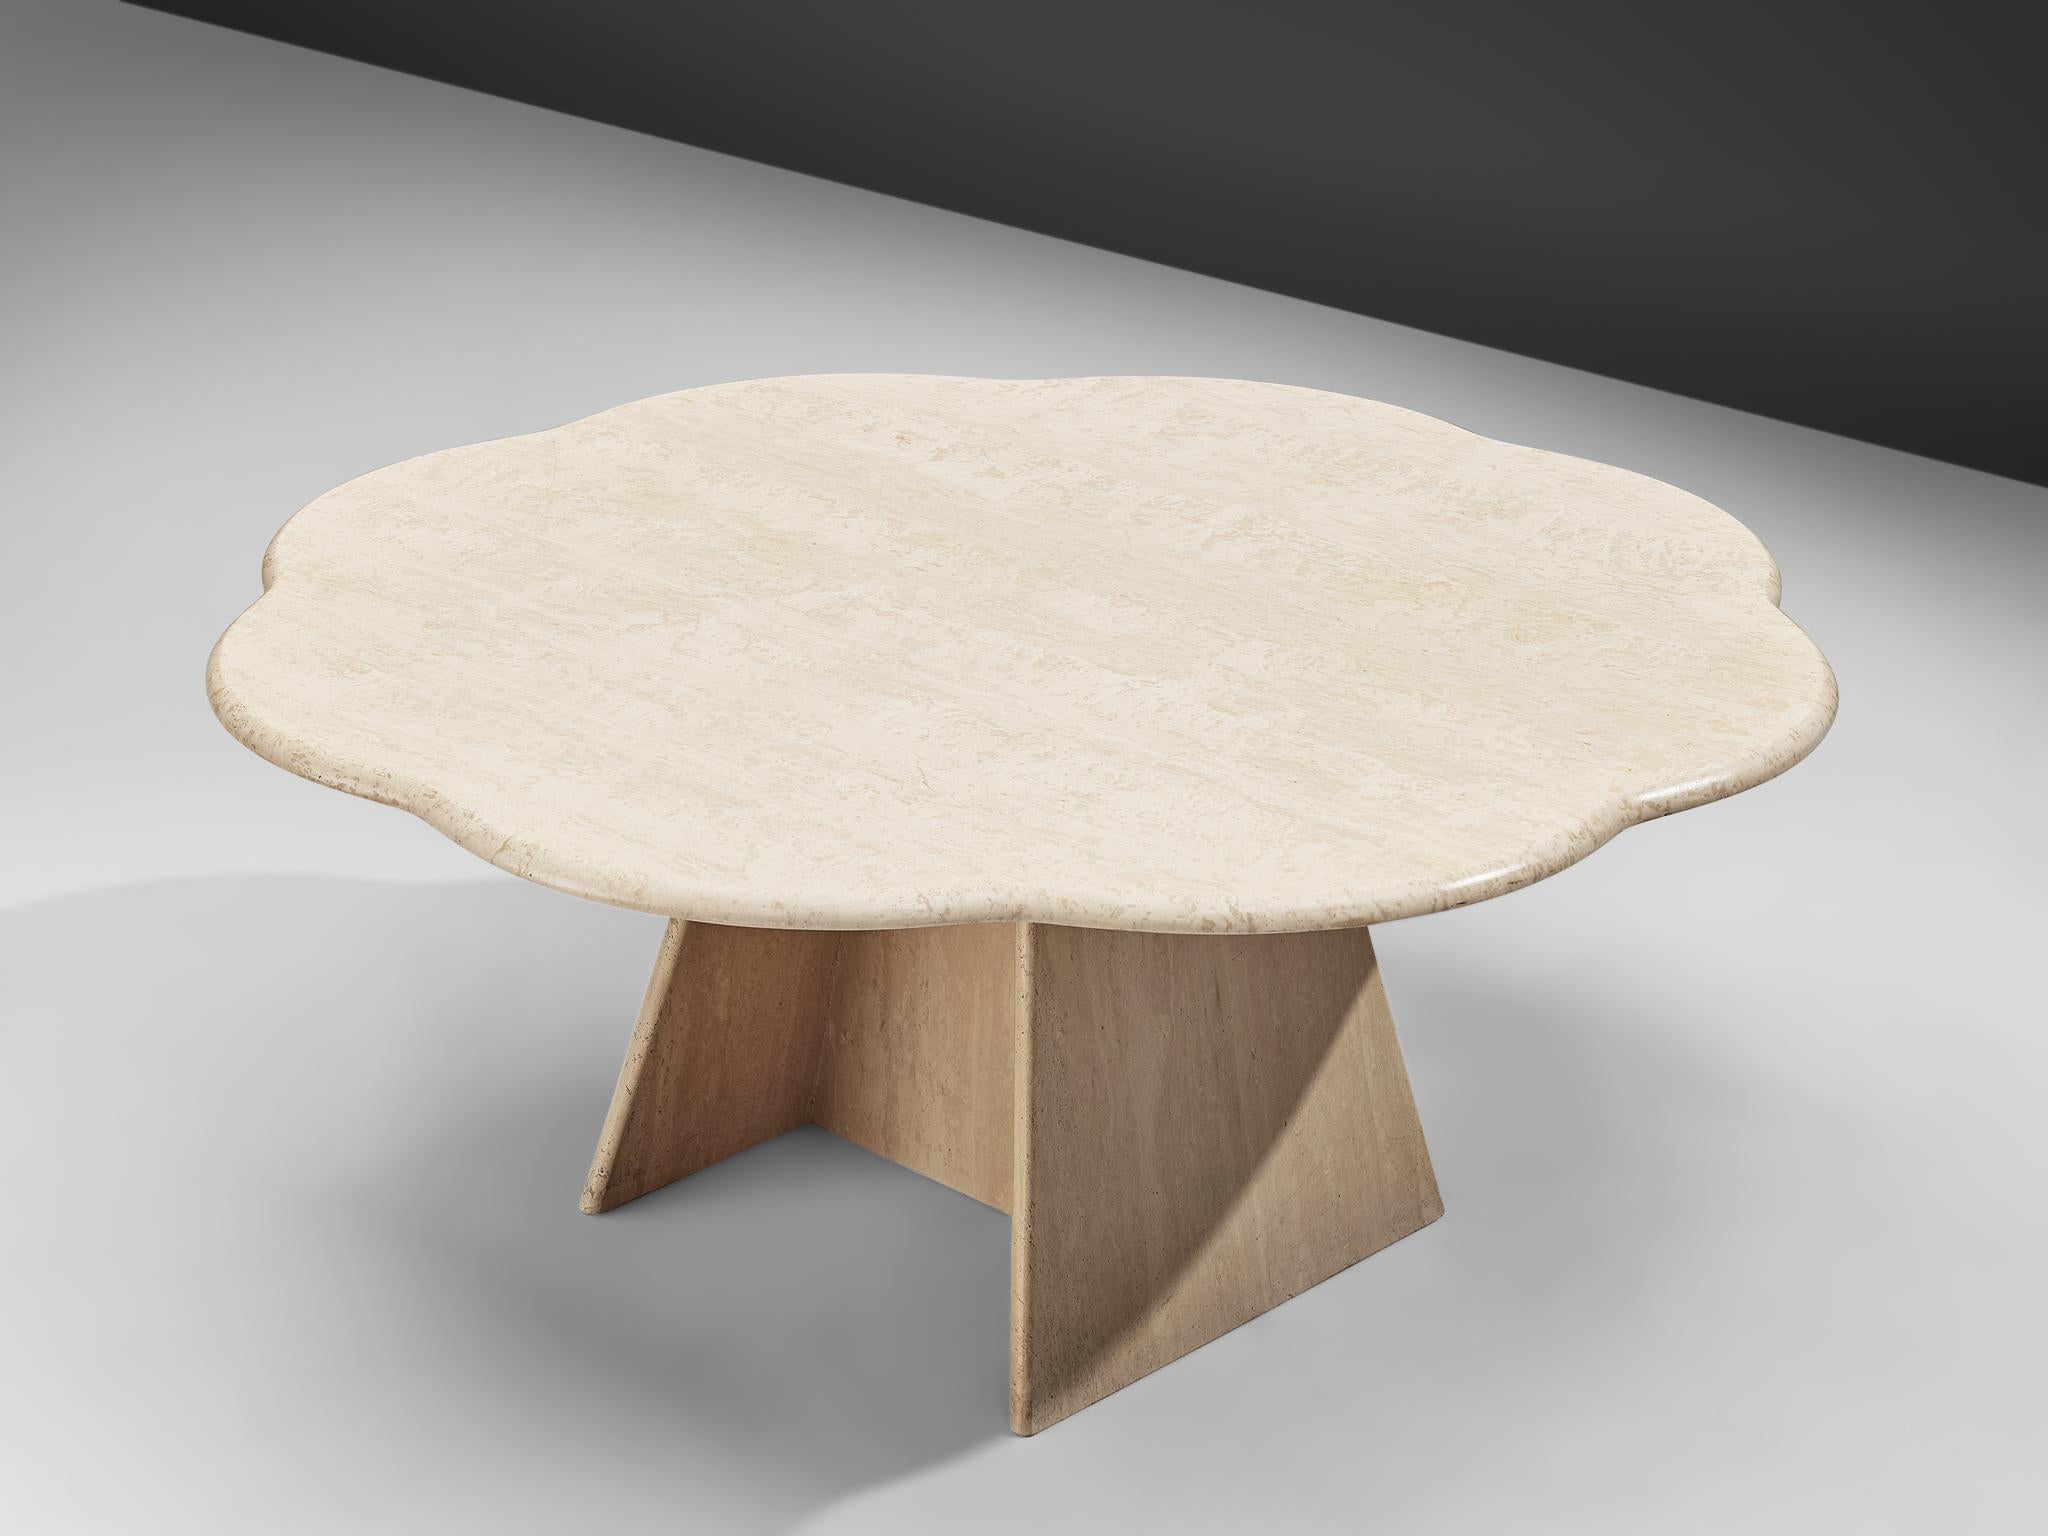 Coffee table, travertine, Europe, 1970s. 

Stunning coffee table with a scalloped, flower inspired shaped tabletop. The geometrical base is made of travertine as well, with a subtle contrast between the organic and flowing top and a more